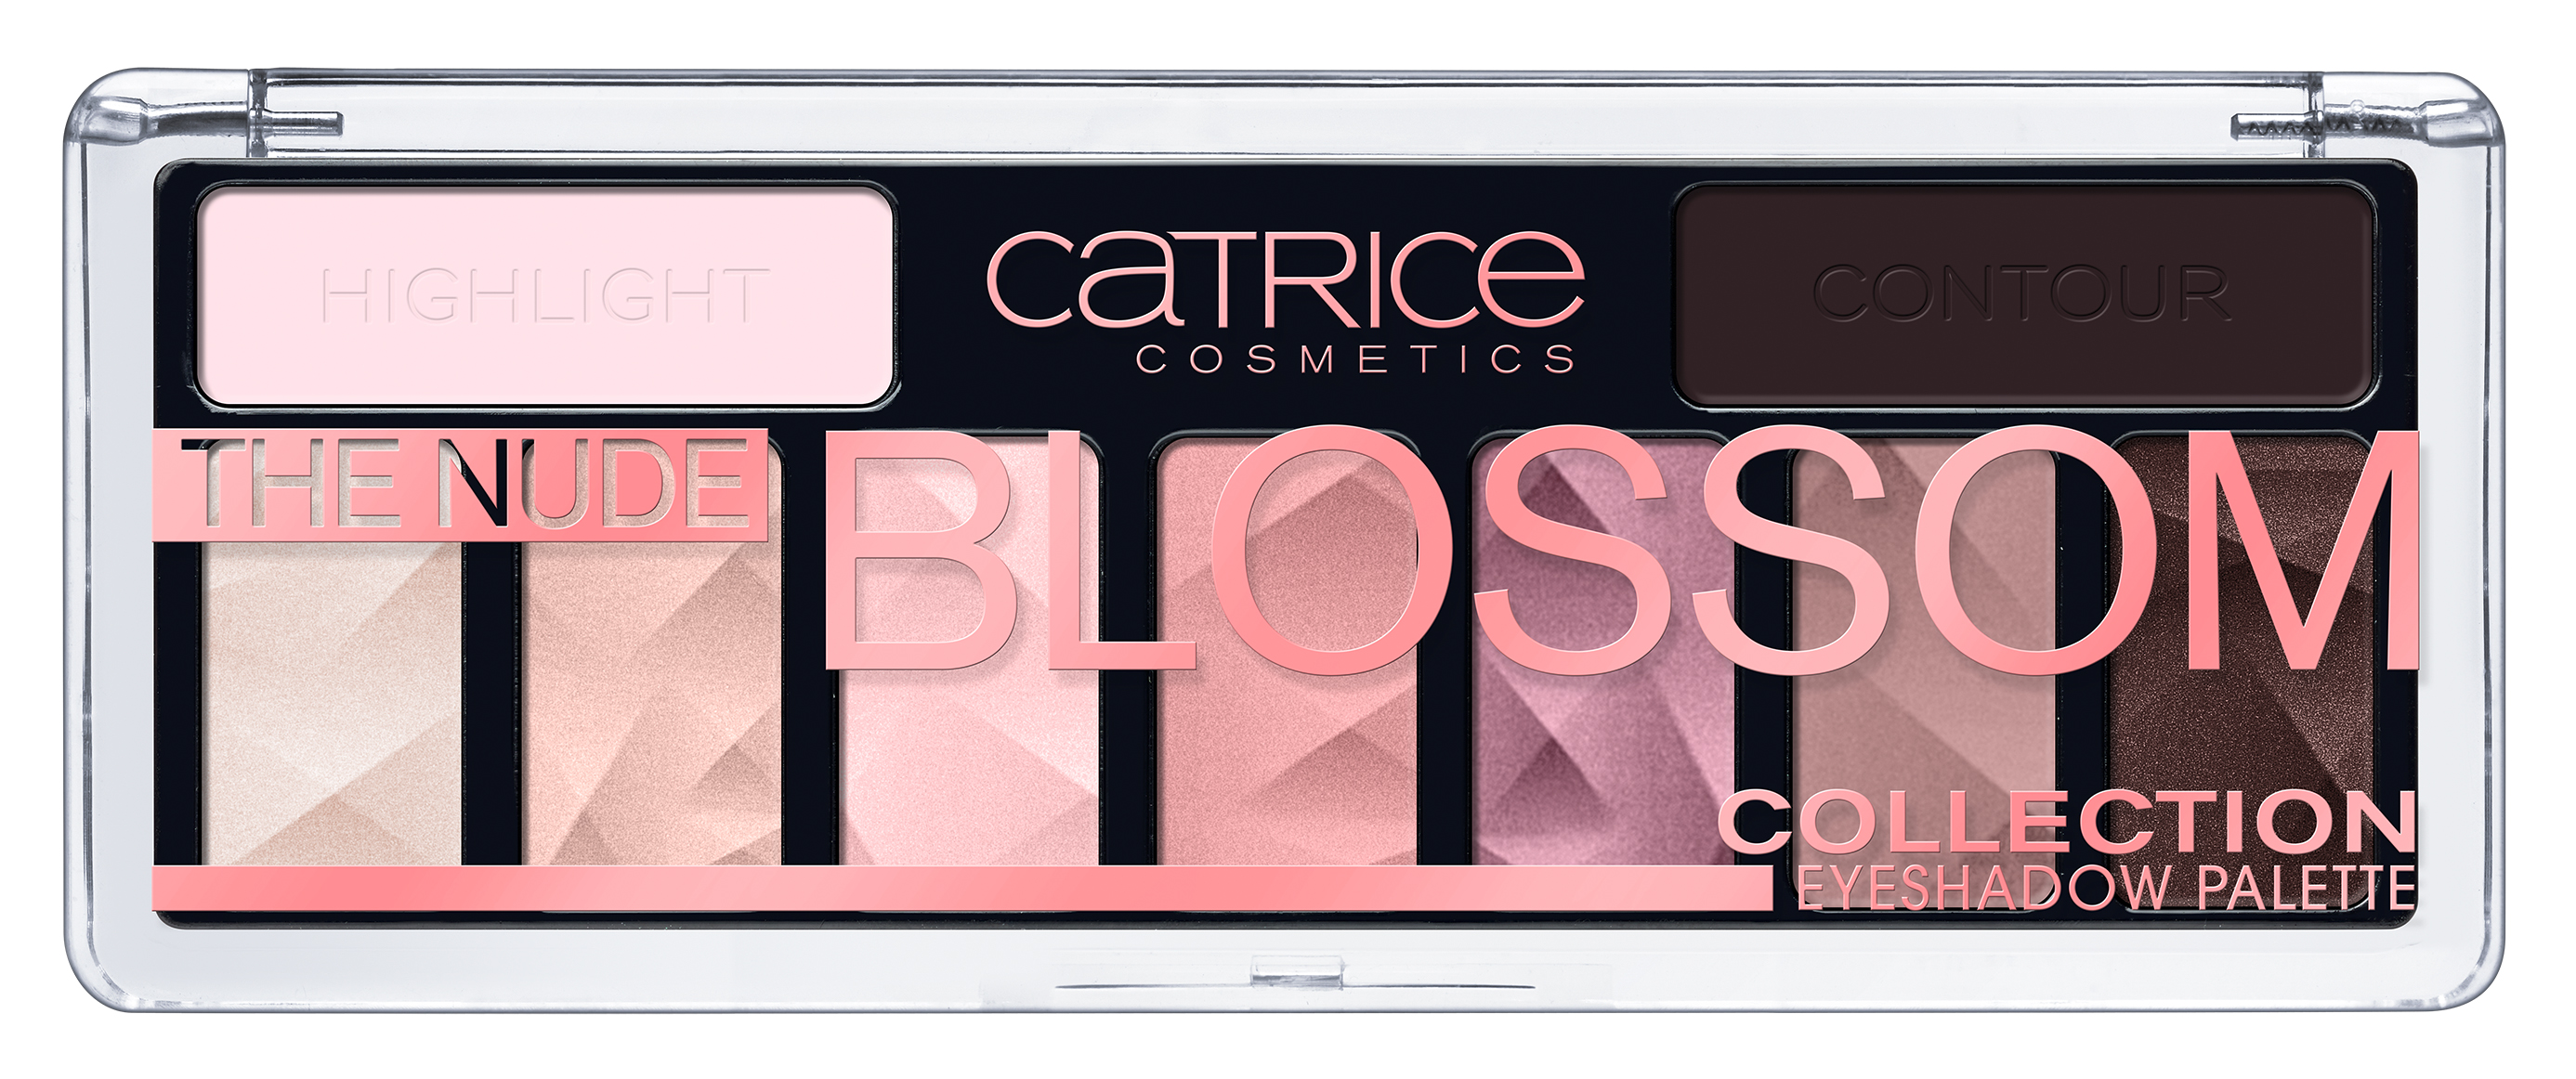 coca55-03b-it-pieces-by-catrice-the-nude-blossom-collection-eyeshadow-palette-010-blossom-n-roses